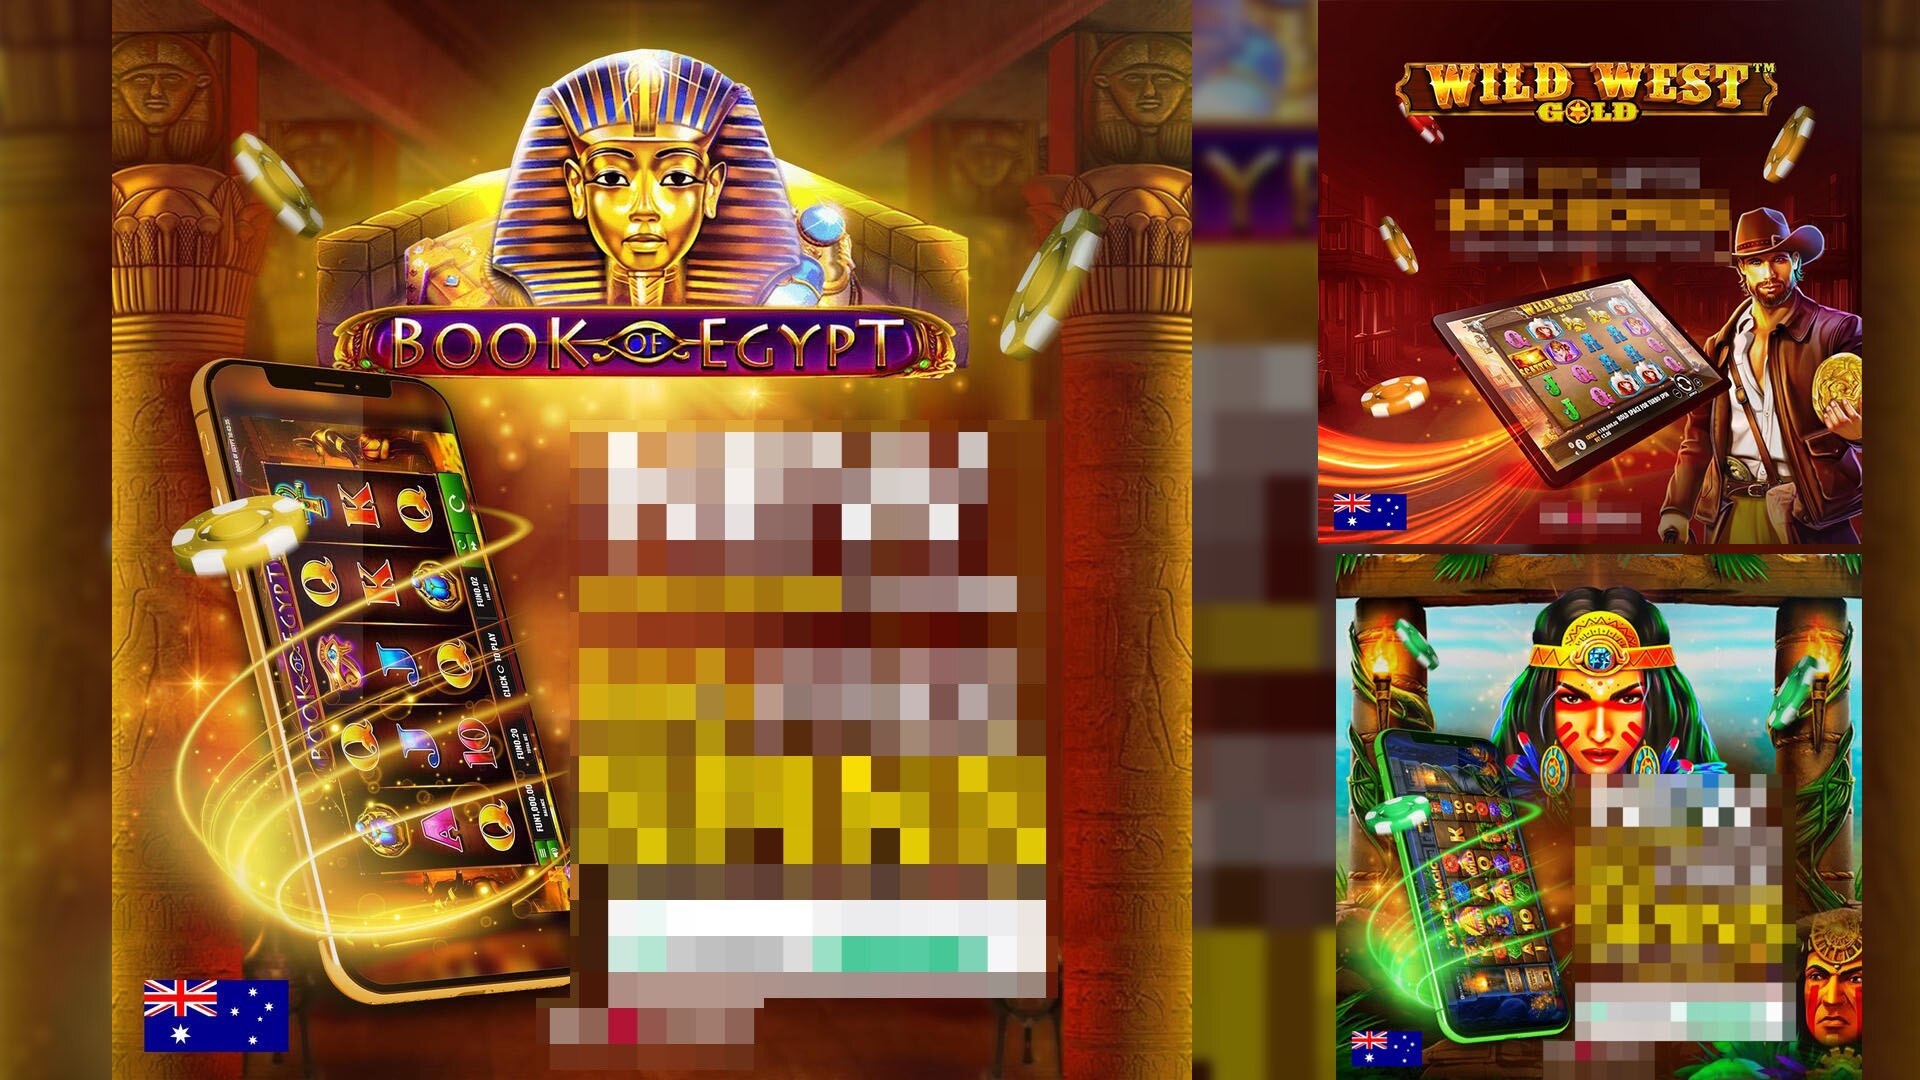 Animated graphic of Tutankamen, Wild West and Native Americans next to a phone to suggest online gambling